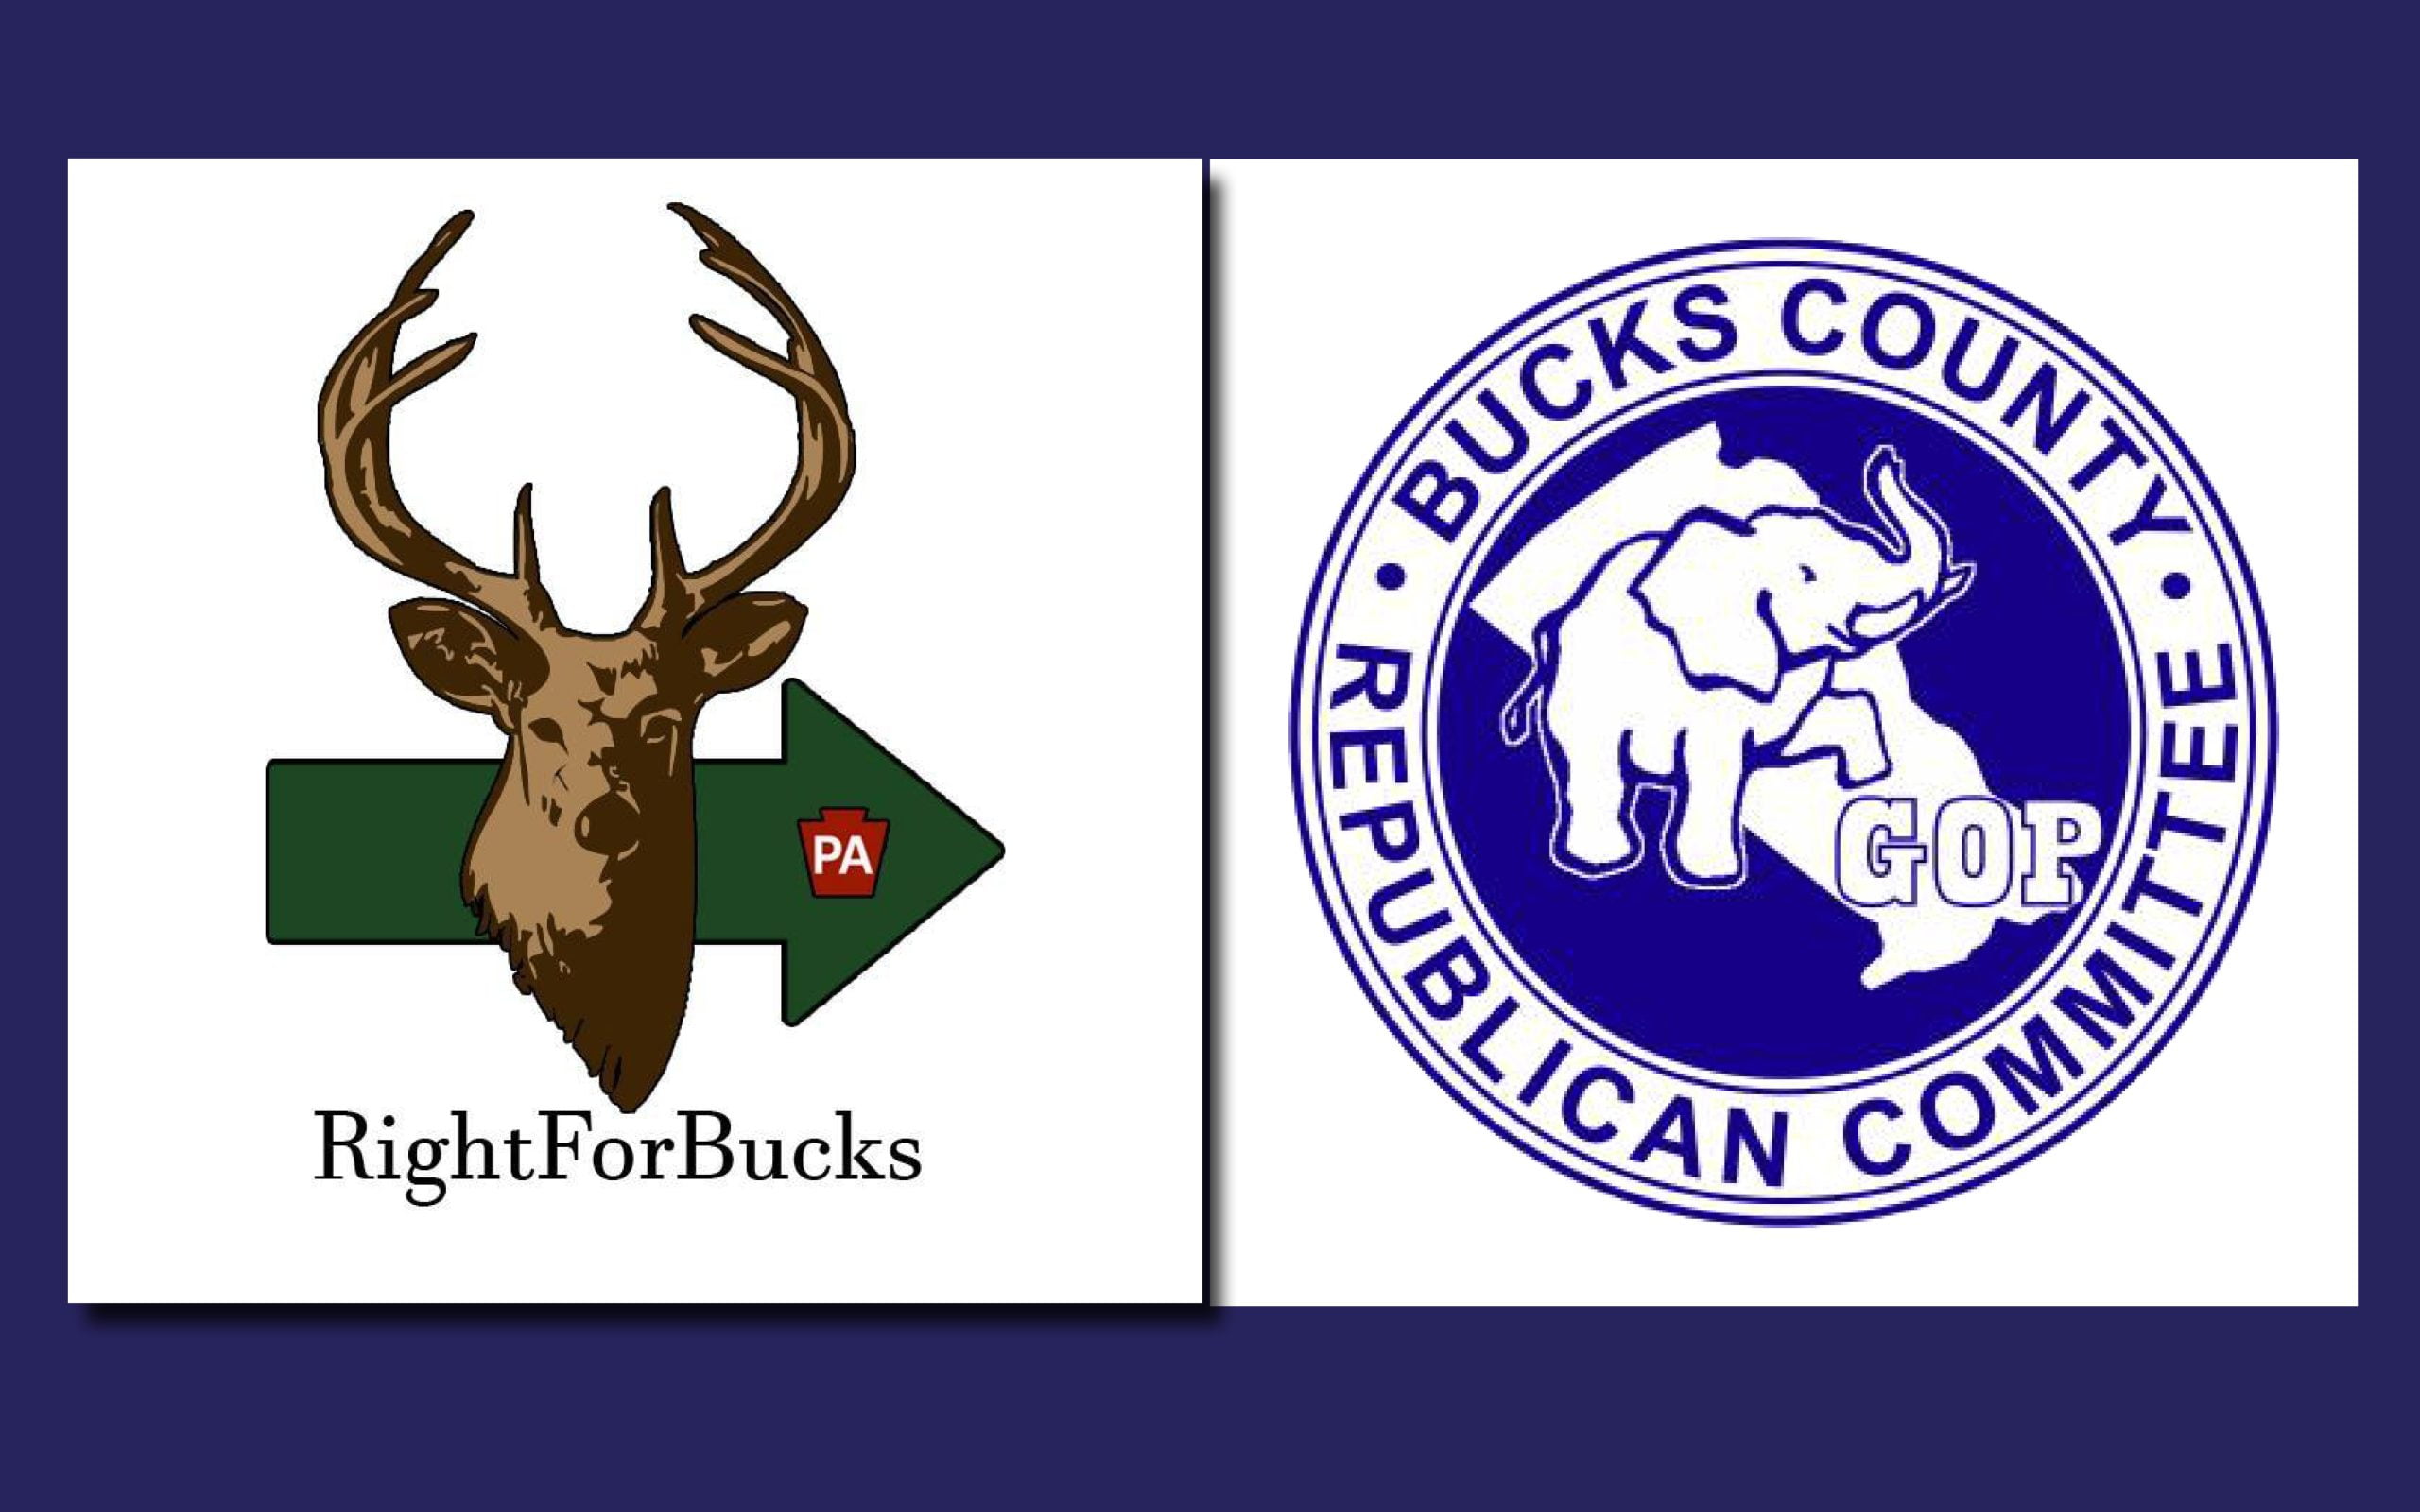 bucksgop scaled - Bucks County Beacon - There Is A Civil War Inside the Bucks County Republican Party